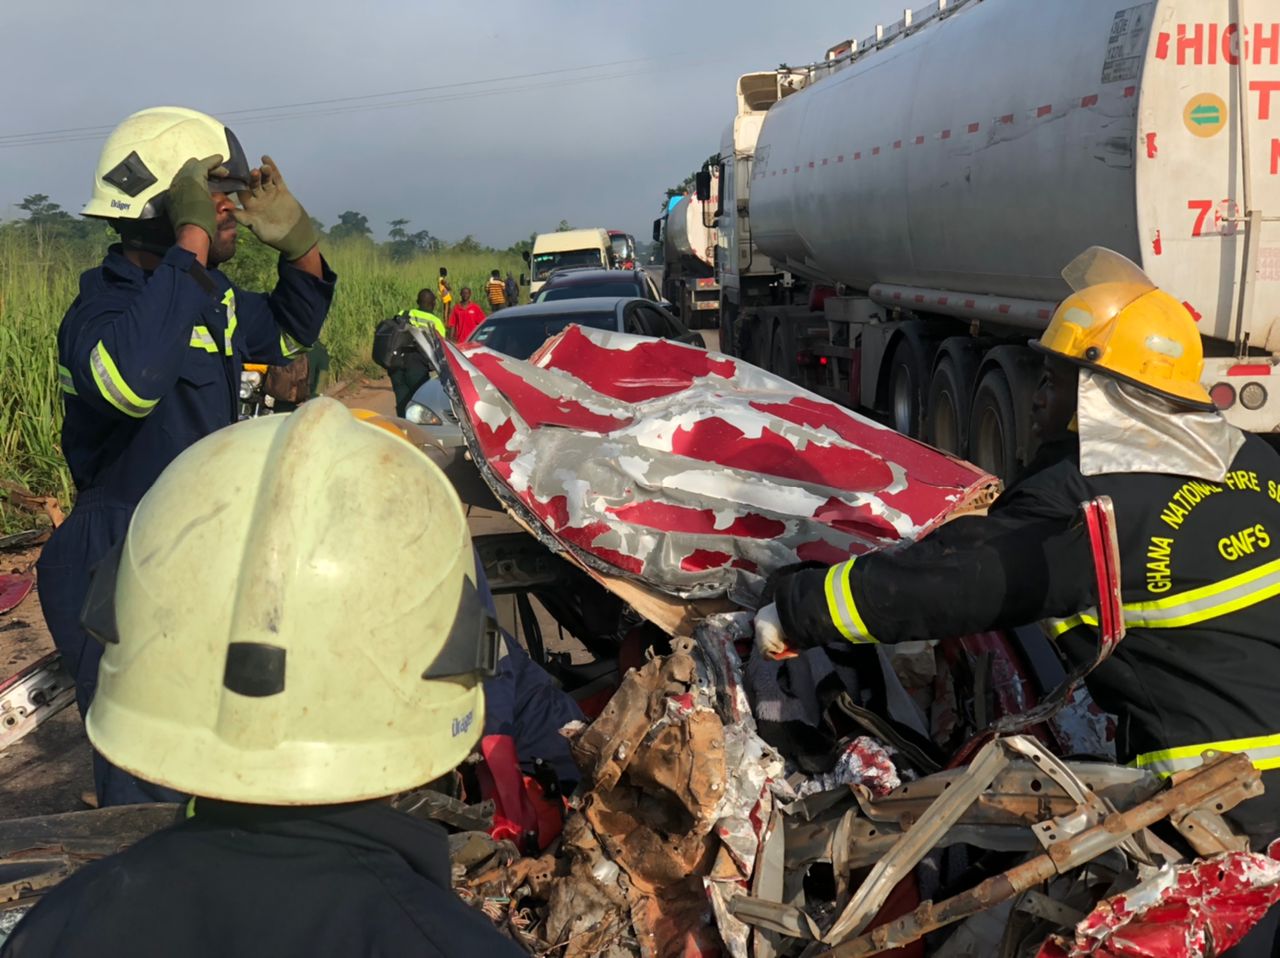 Scores siphon diesel from tanker truck at accident scene on Kumasi-Accra highway